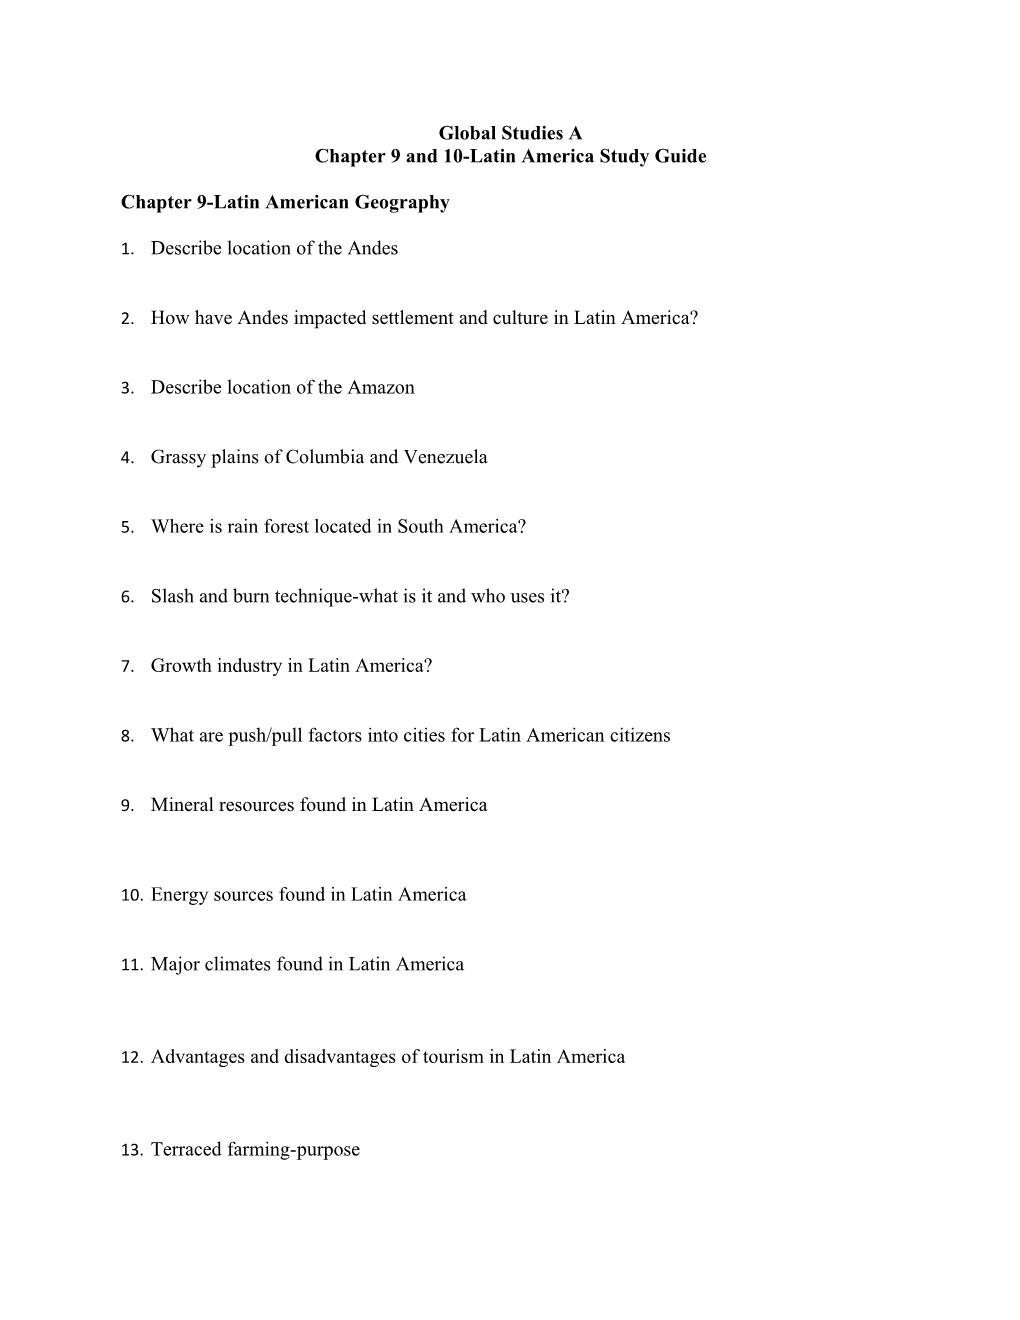 Chapter 9 and 10-Latin Americastudy Guide